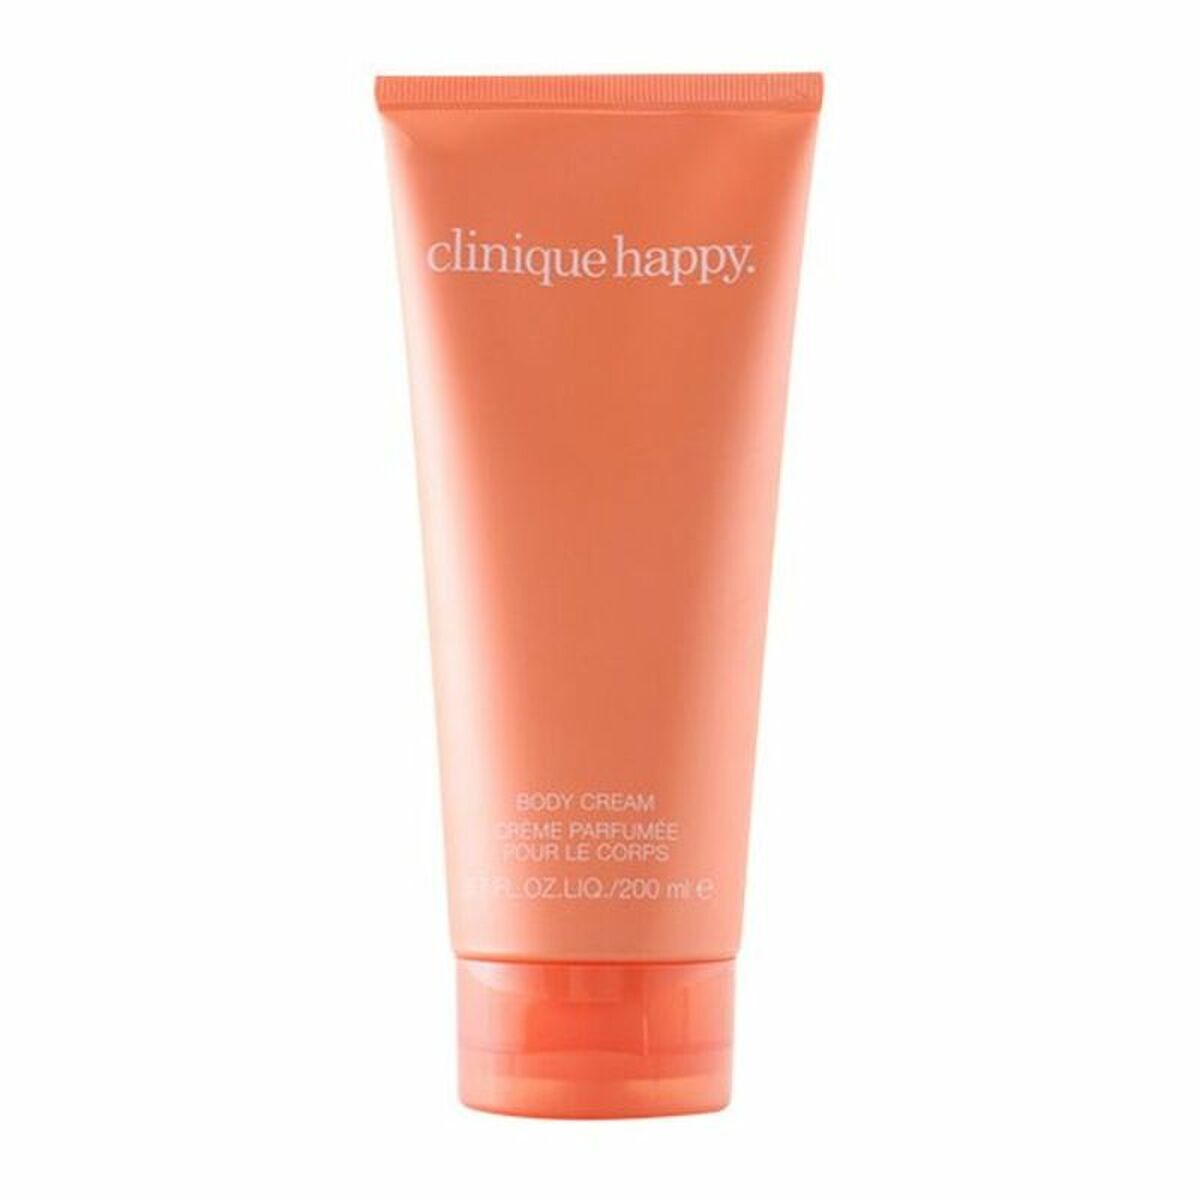 Body Cream Happy Clinique (200 ml) | Clinique | Aylal Beauty